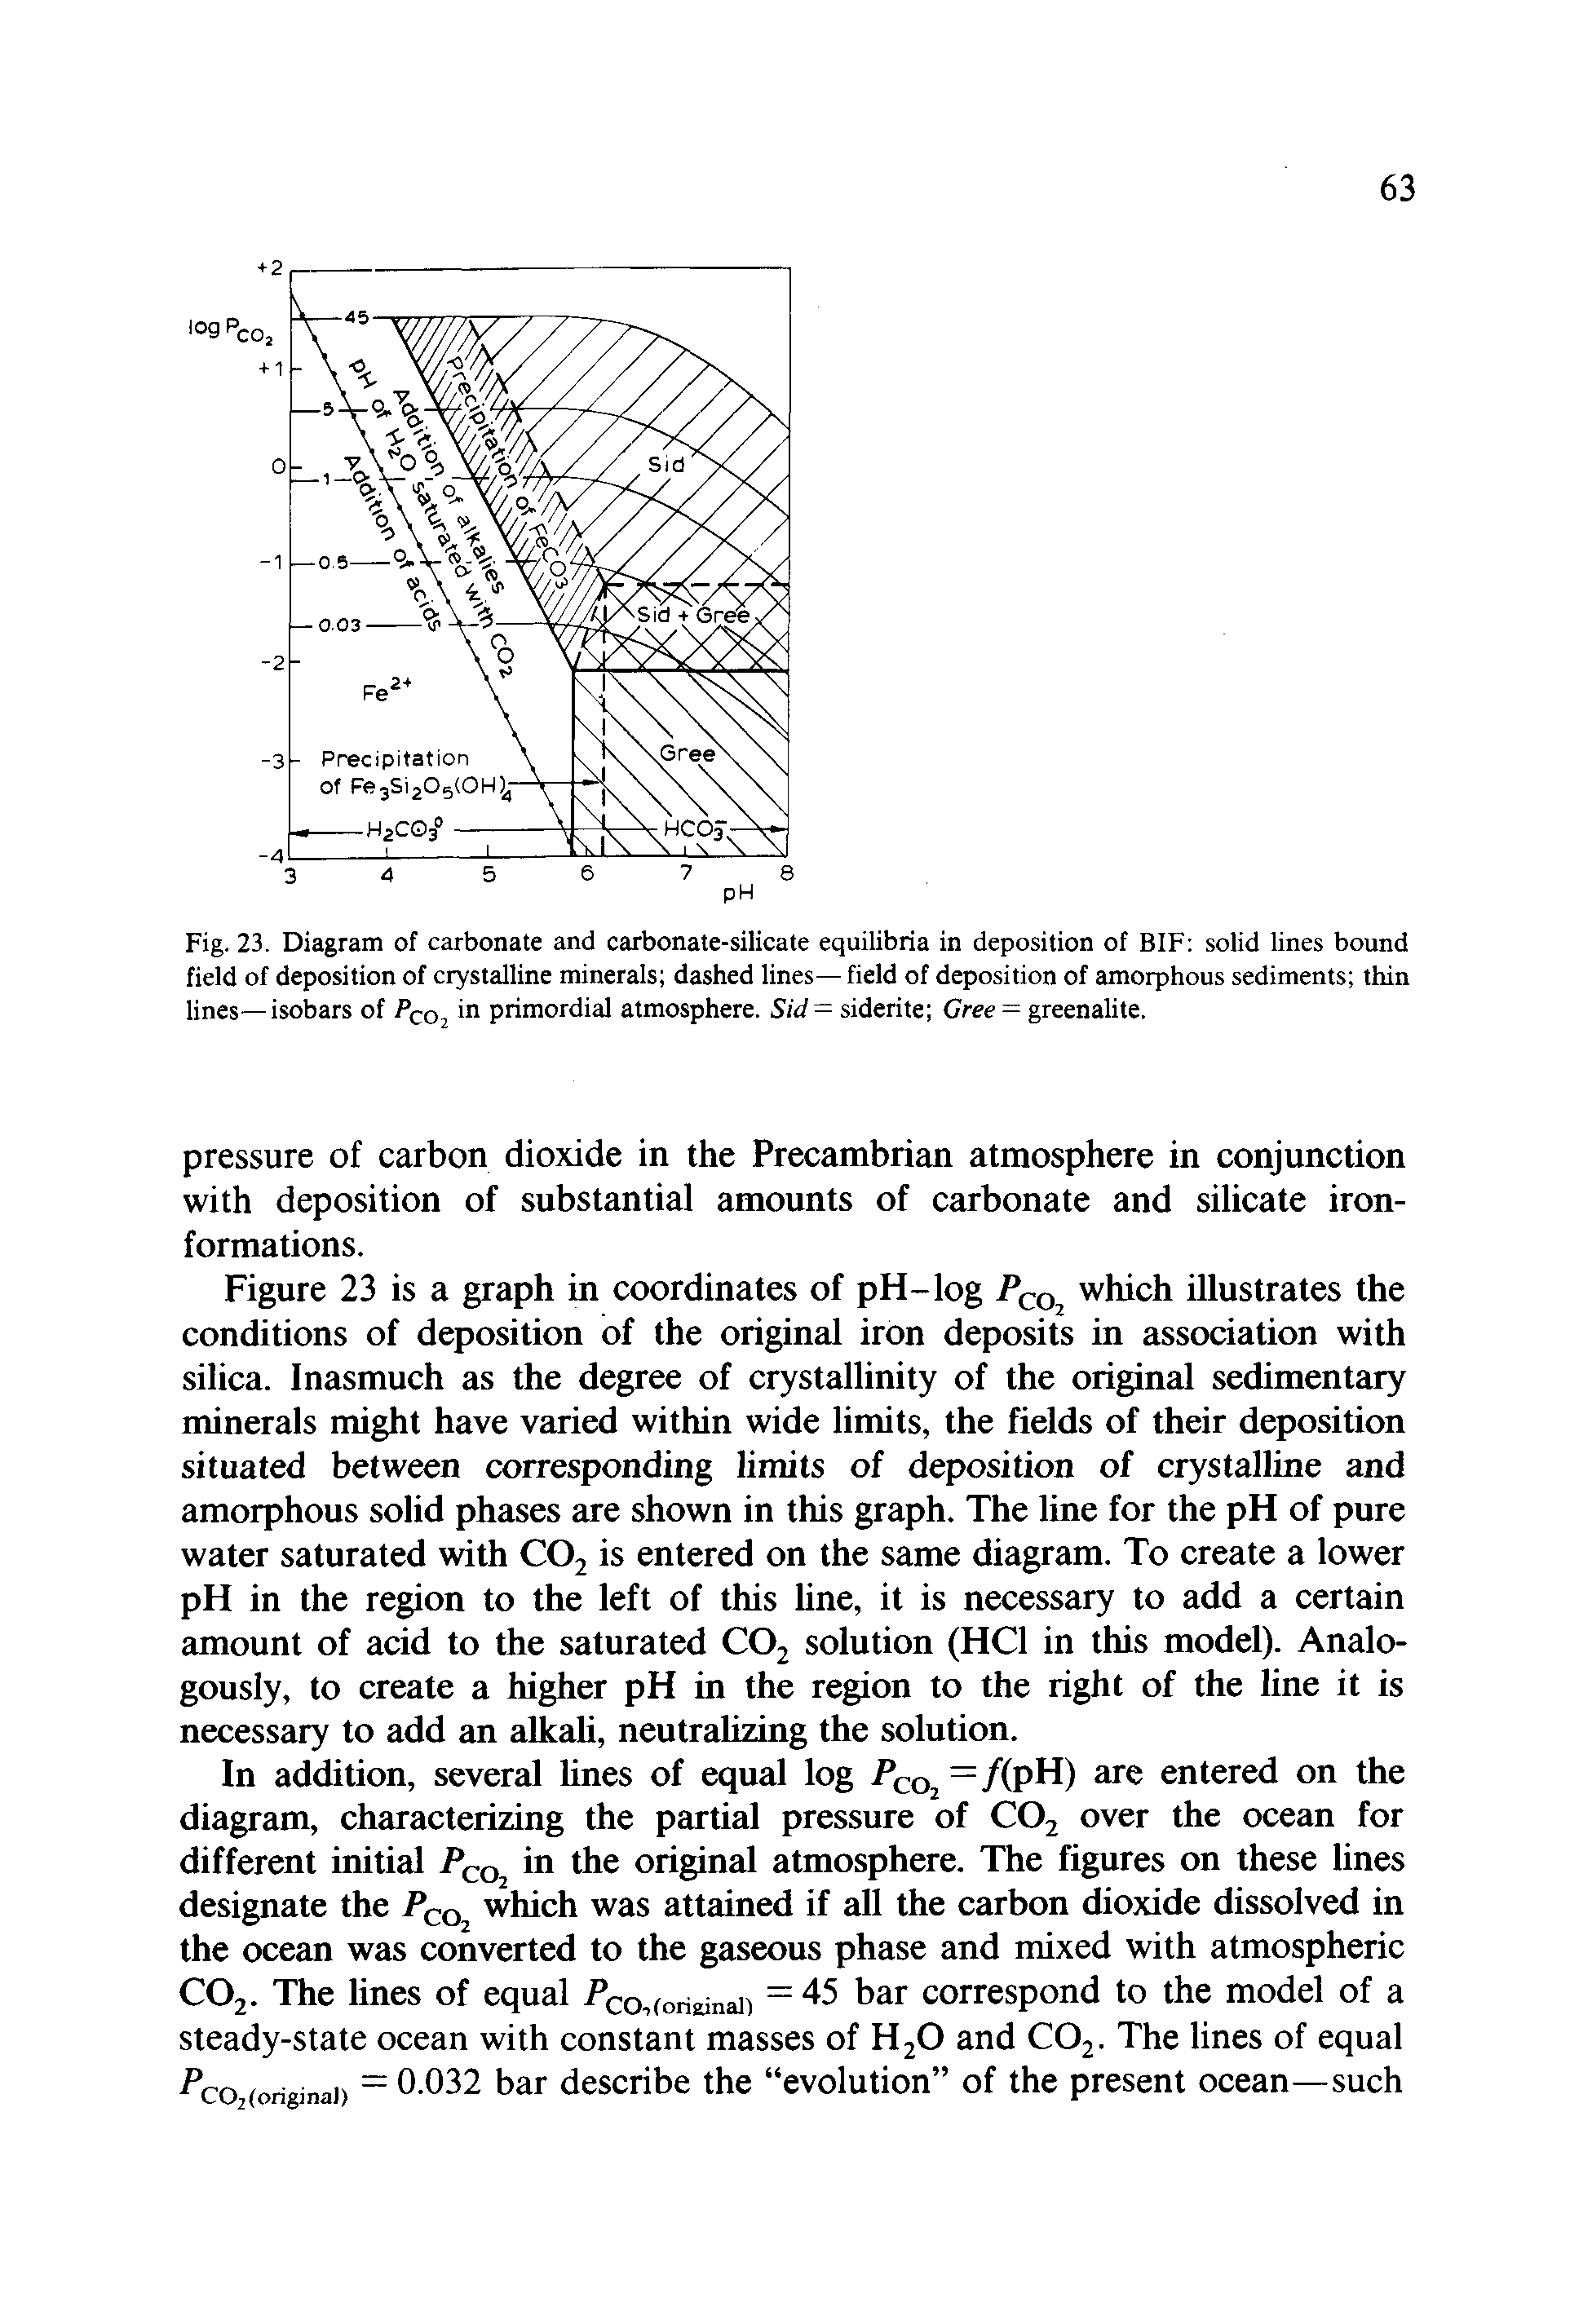 Fig. 23. Diagram of carbonate and carbonate-silicate equilibria in deposition of BIF solid lines bound field of deposition of crystalline minerals dashed lines— field of deposition of amorphous sediments thin lines—isobars of C02 in primordial atmosphere. Sid = siderite Cree = greenalite.